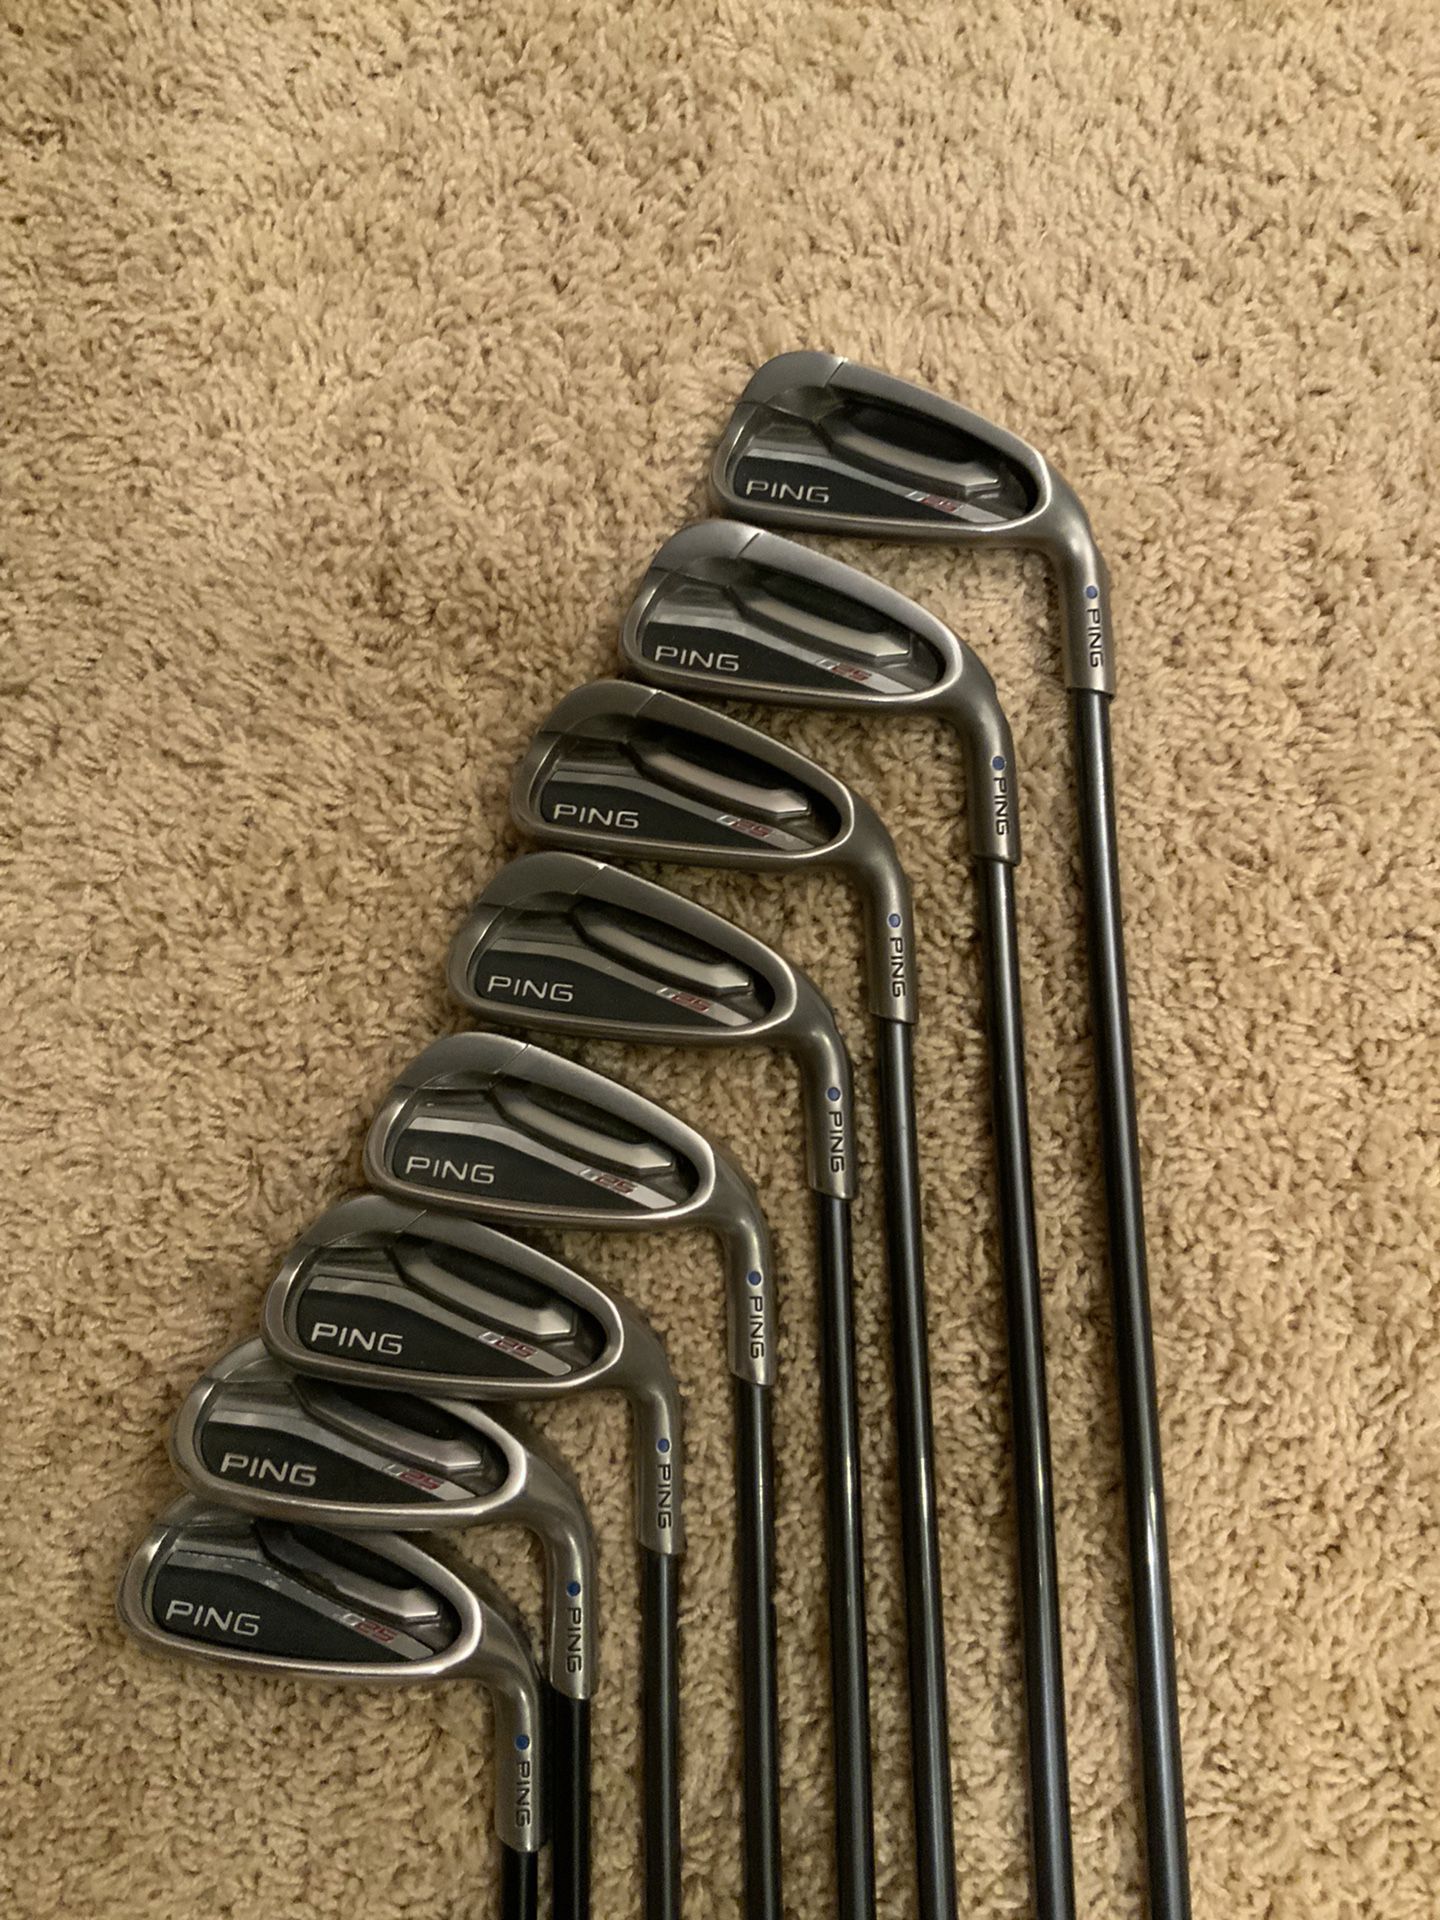 Ping G25 Irons.  Right Handed. Blue Dot, 4-9+S+U (8 Club set). Ping Graphite SR Senior Flex Shafts with Ping Grips.